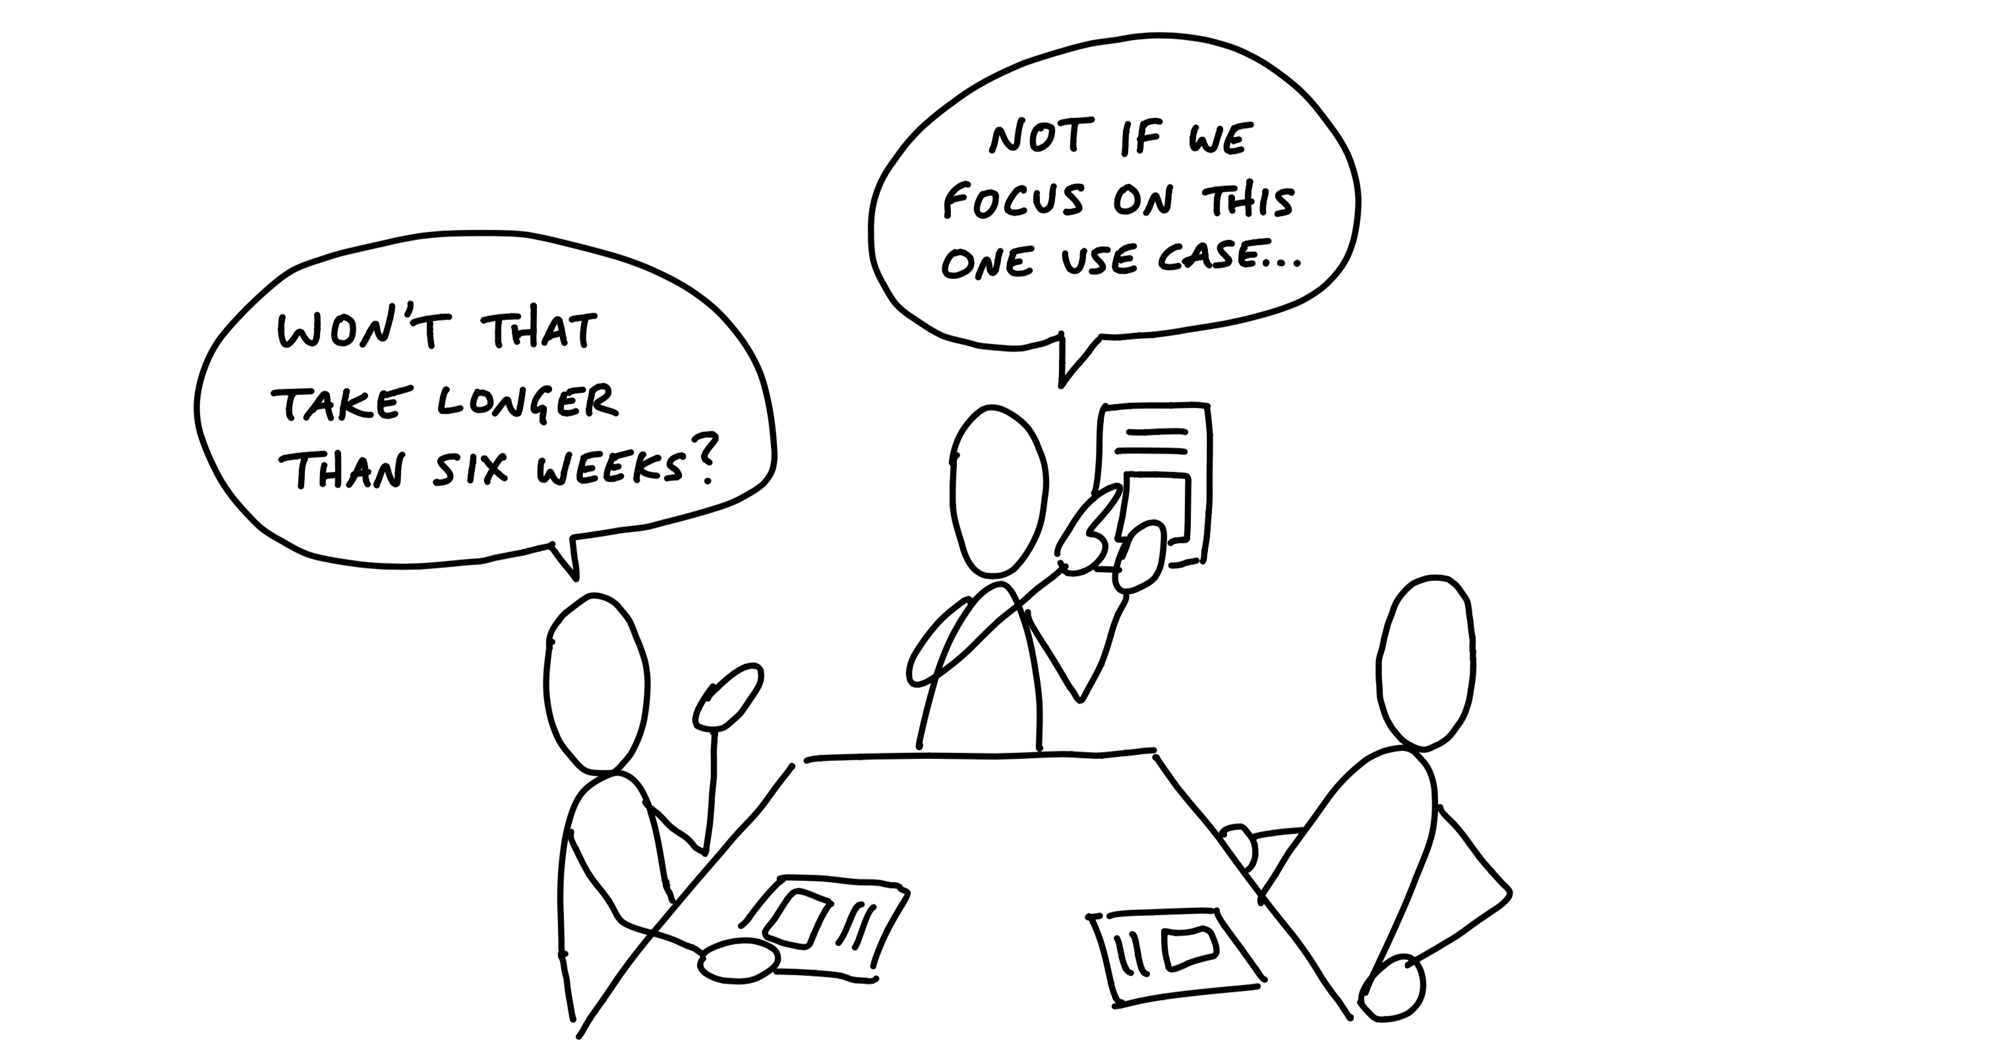 Cartoon. Three people sit around a table. The person in the middle is standing and presenting a document. The person on the left says: Won't that take longer than six weeks? The one presenting points to the document and says: Notif we focus on this one use case. The person on the right leans back and observes the discussion.